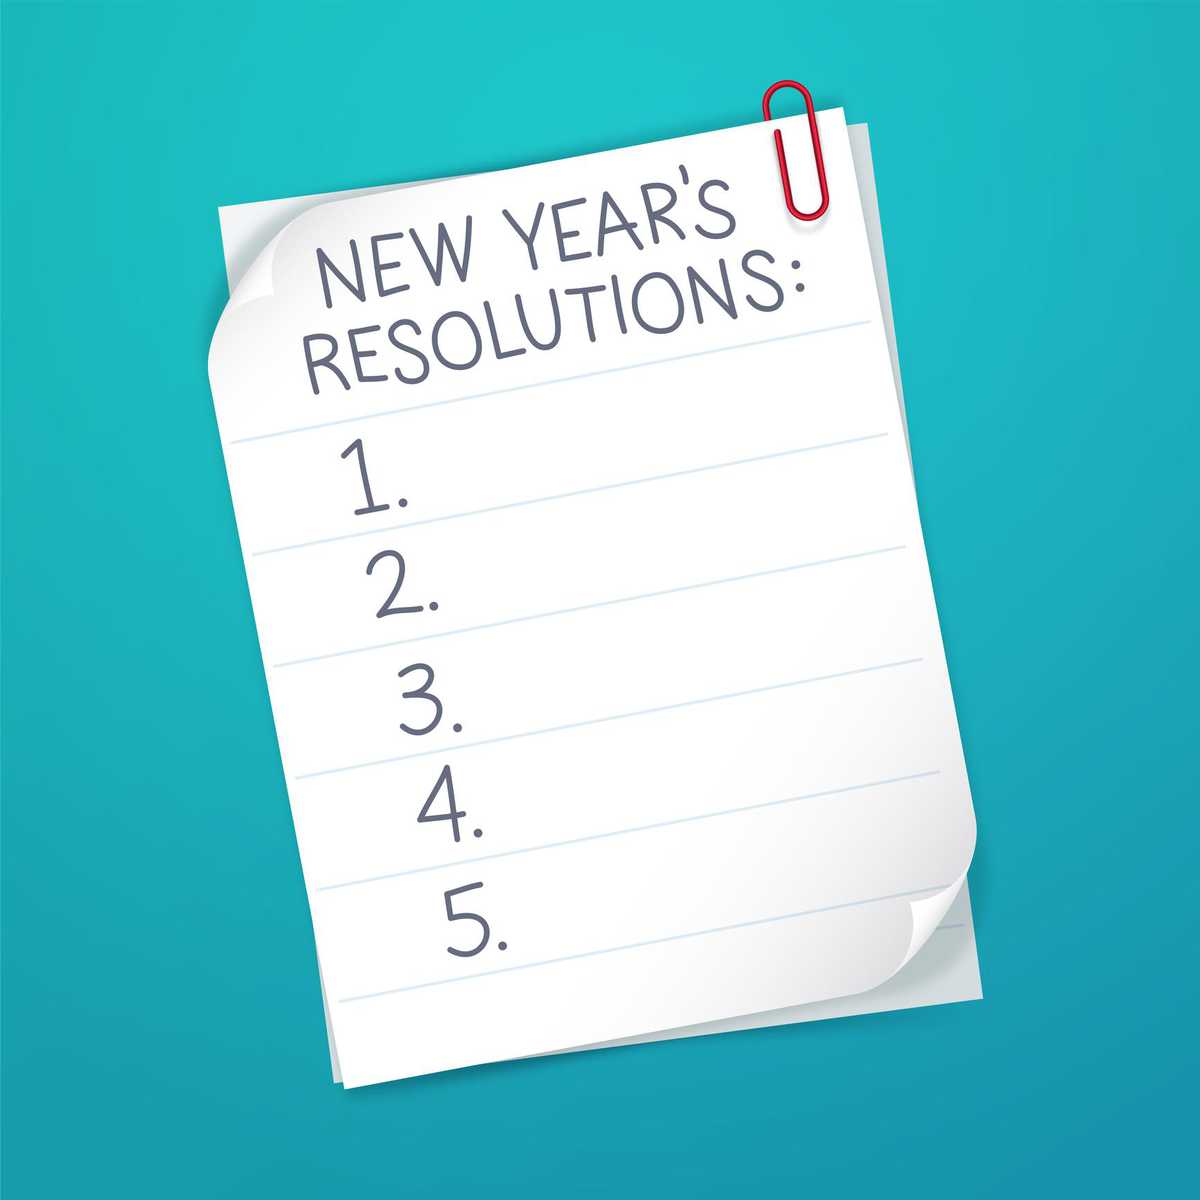 Top 5 New Years Resolutions for 2020